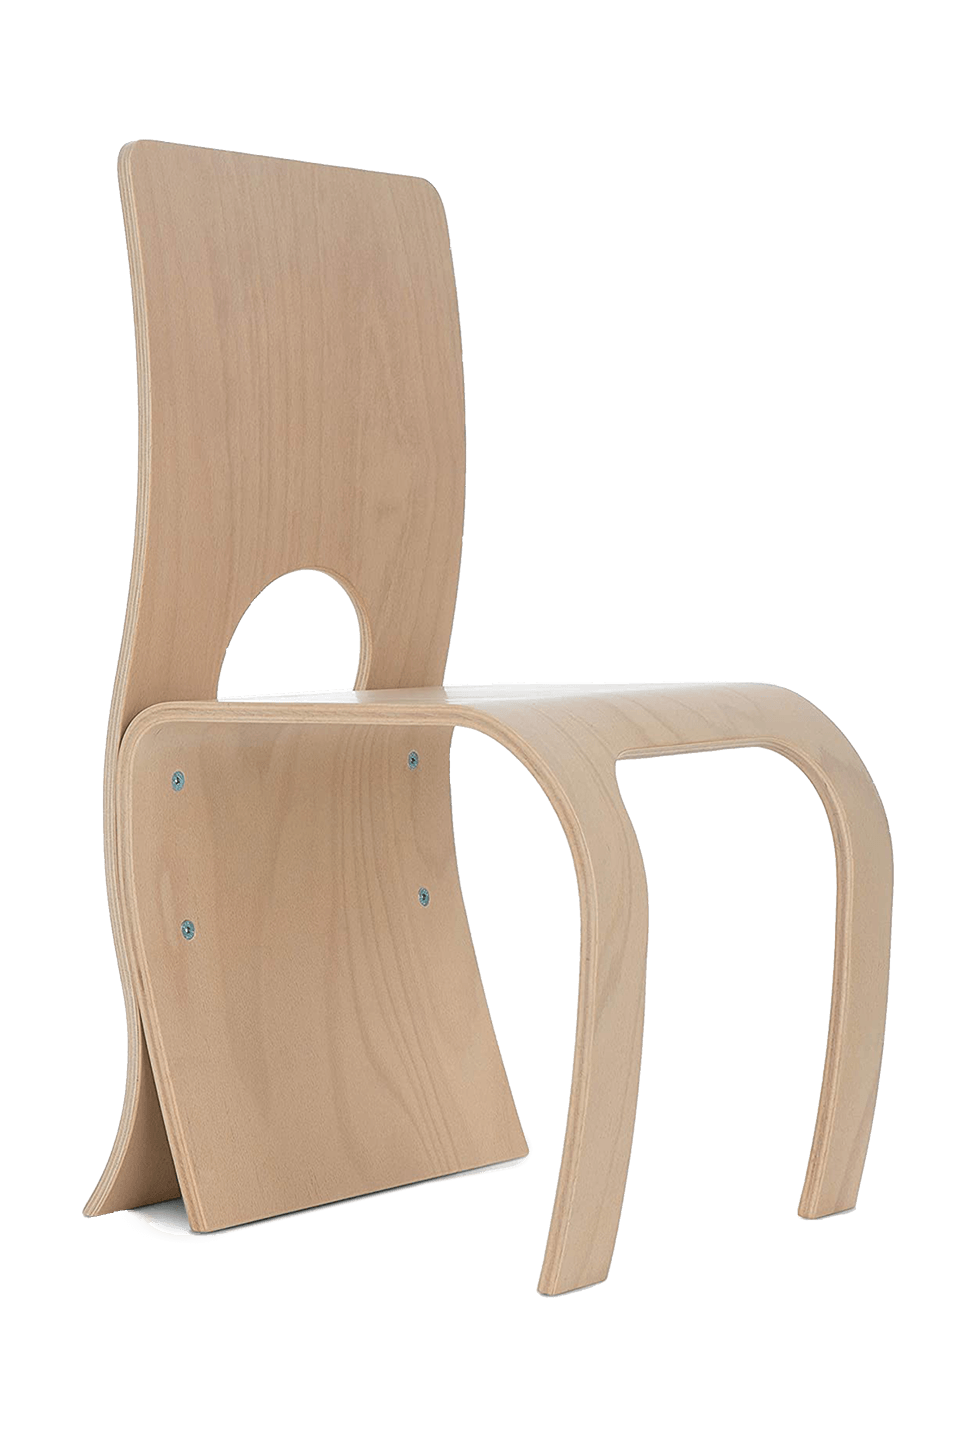 curved plywood chair